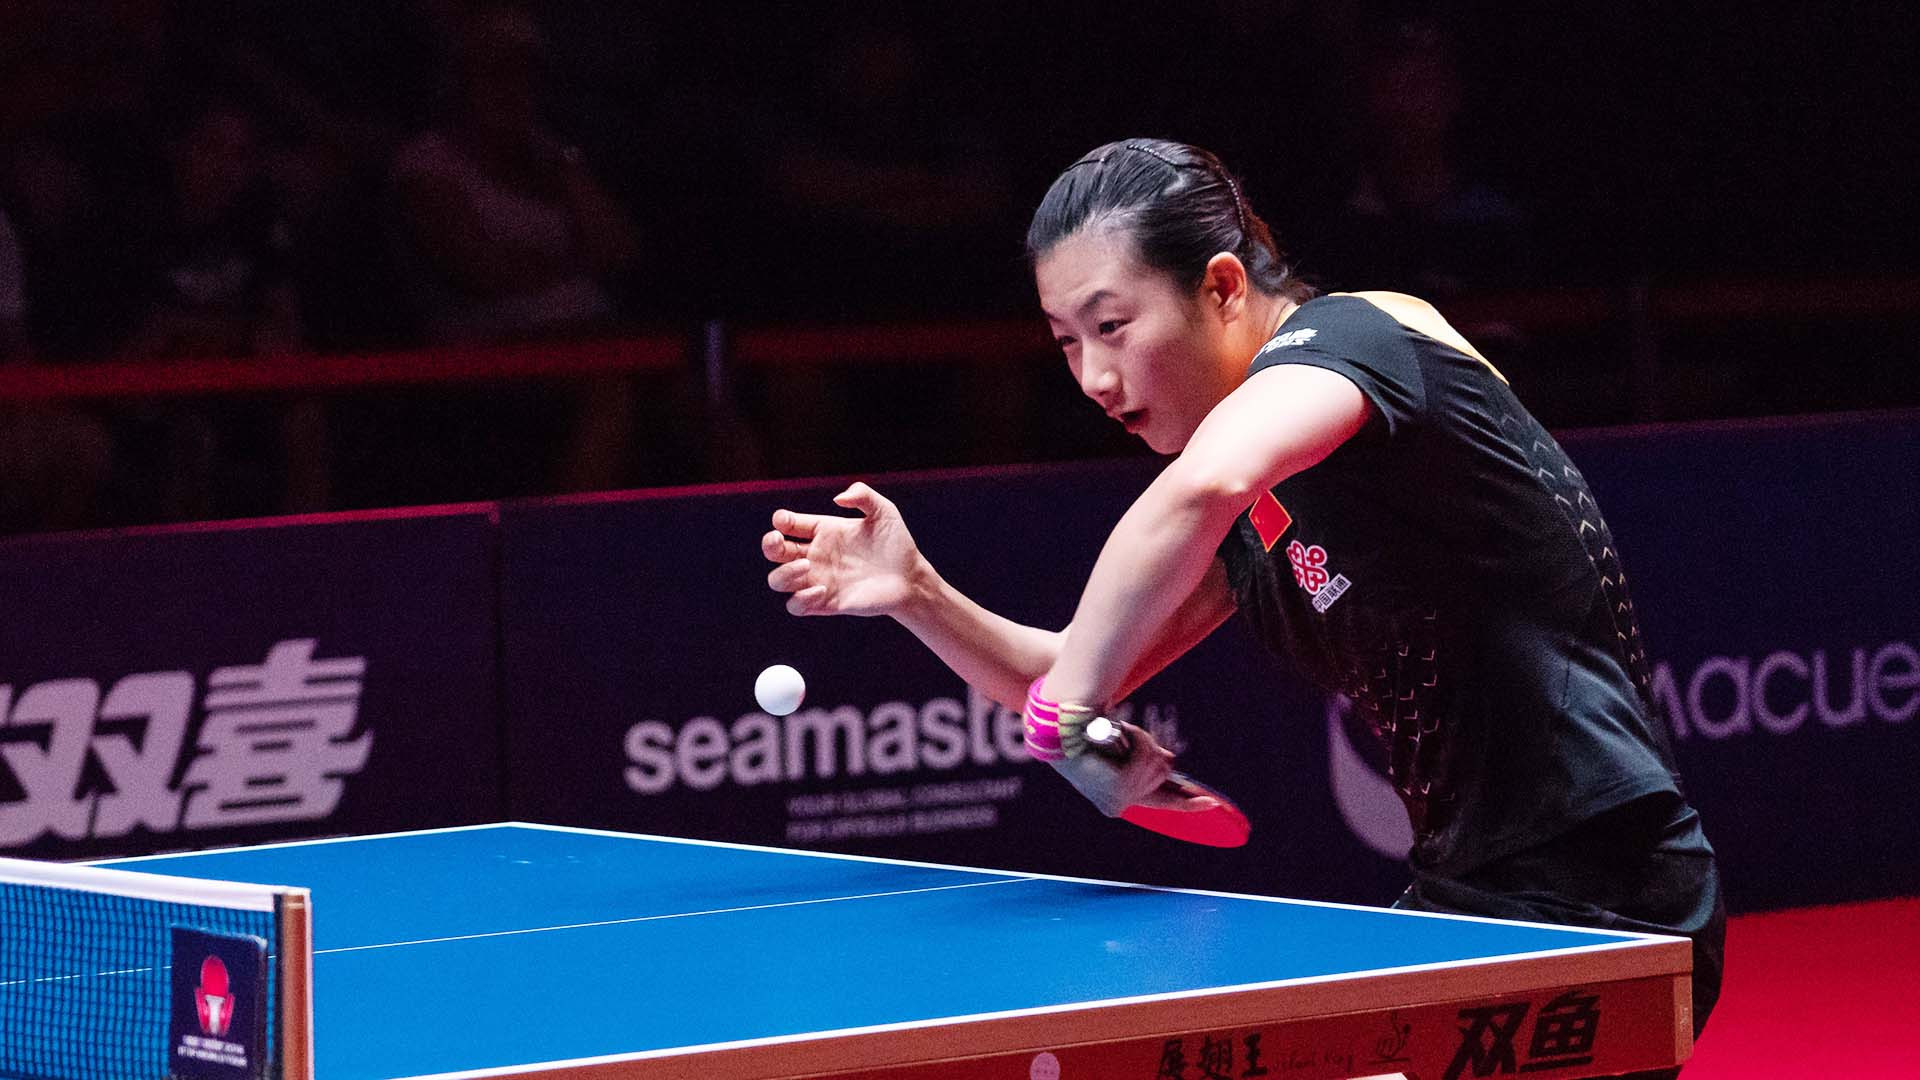  Xu Xin and Ding Ning earn Chinese double at ITTF Bulgaria Open